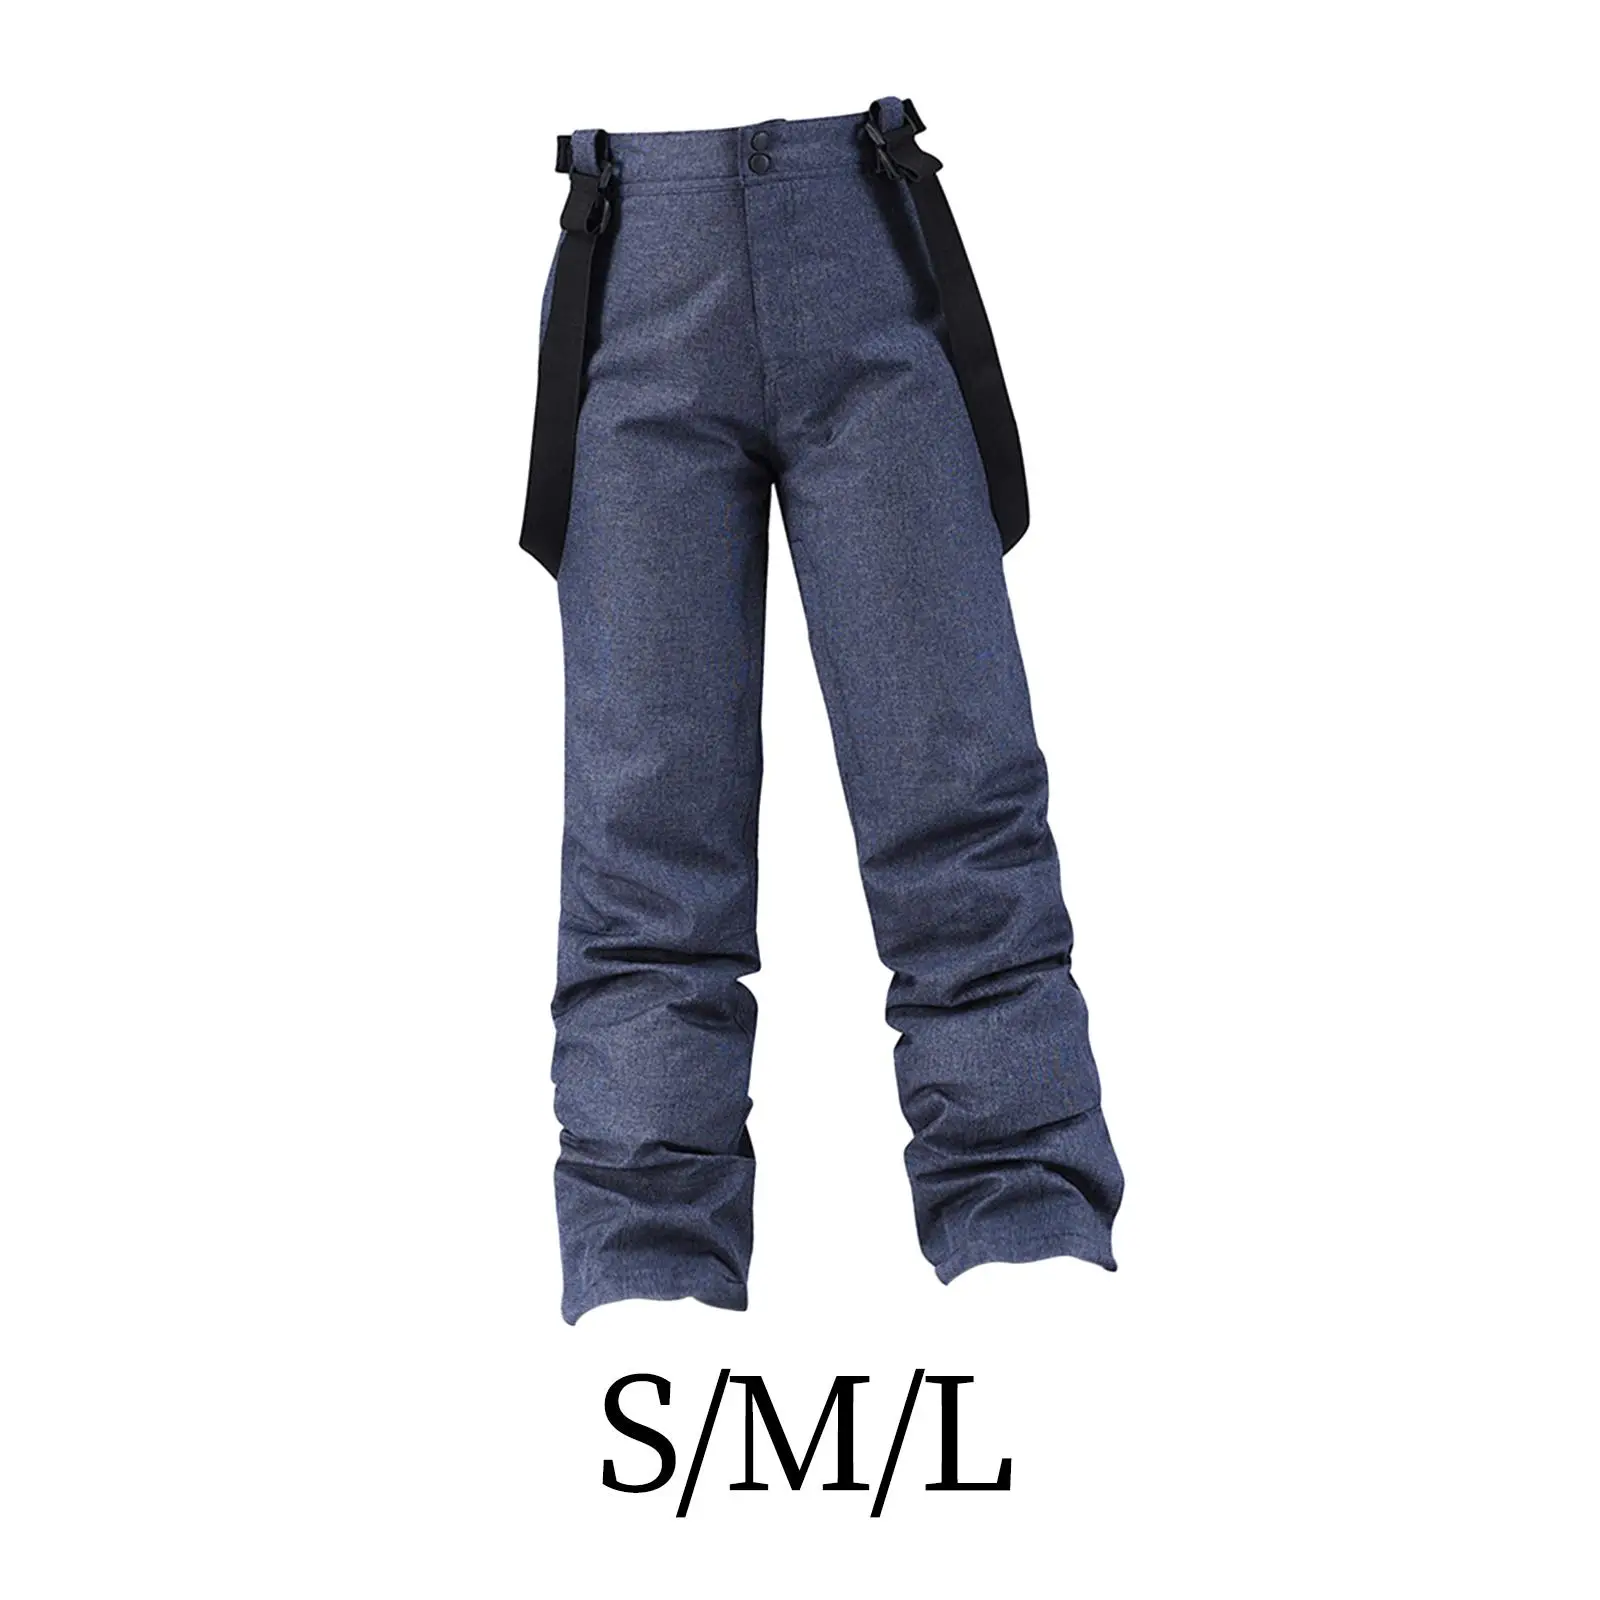 Ski Pants Insulated Windproof Warm Full Length Lightweight Breathable Thick Snowboarding Pants Skiing Cargo Pants Snow Bibs